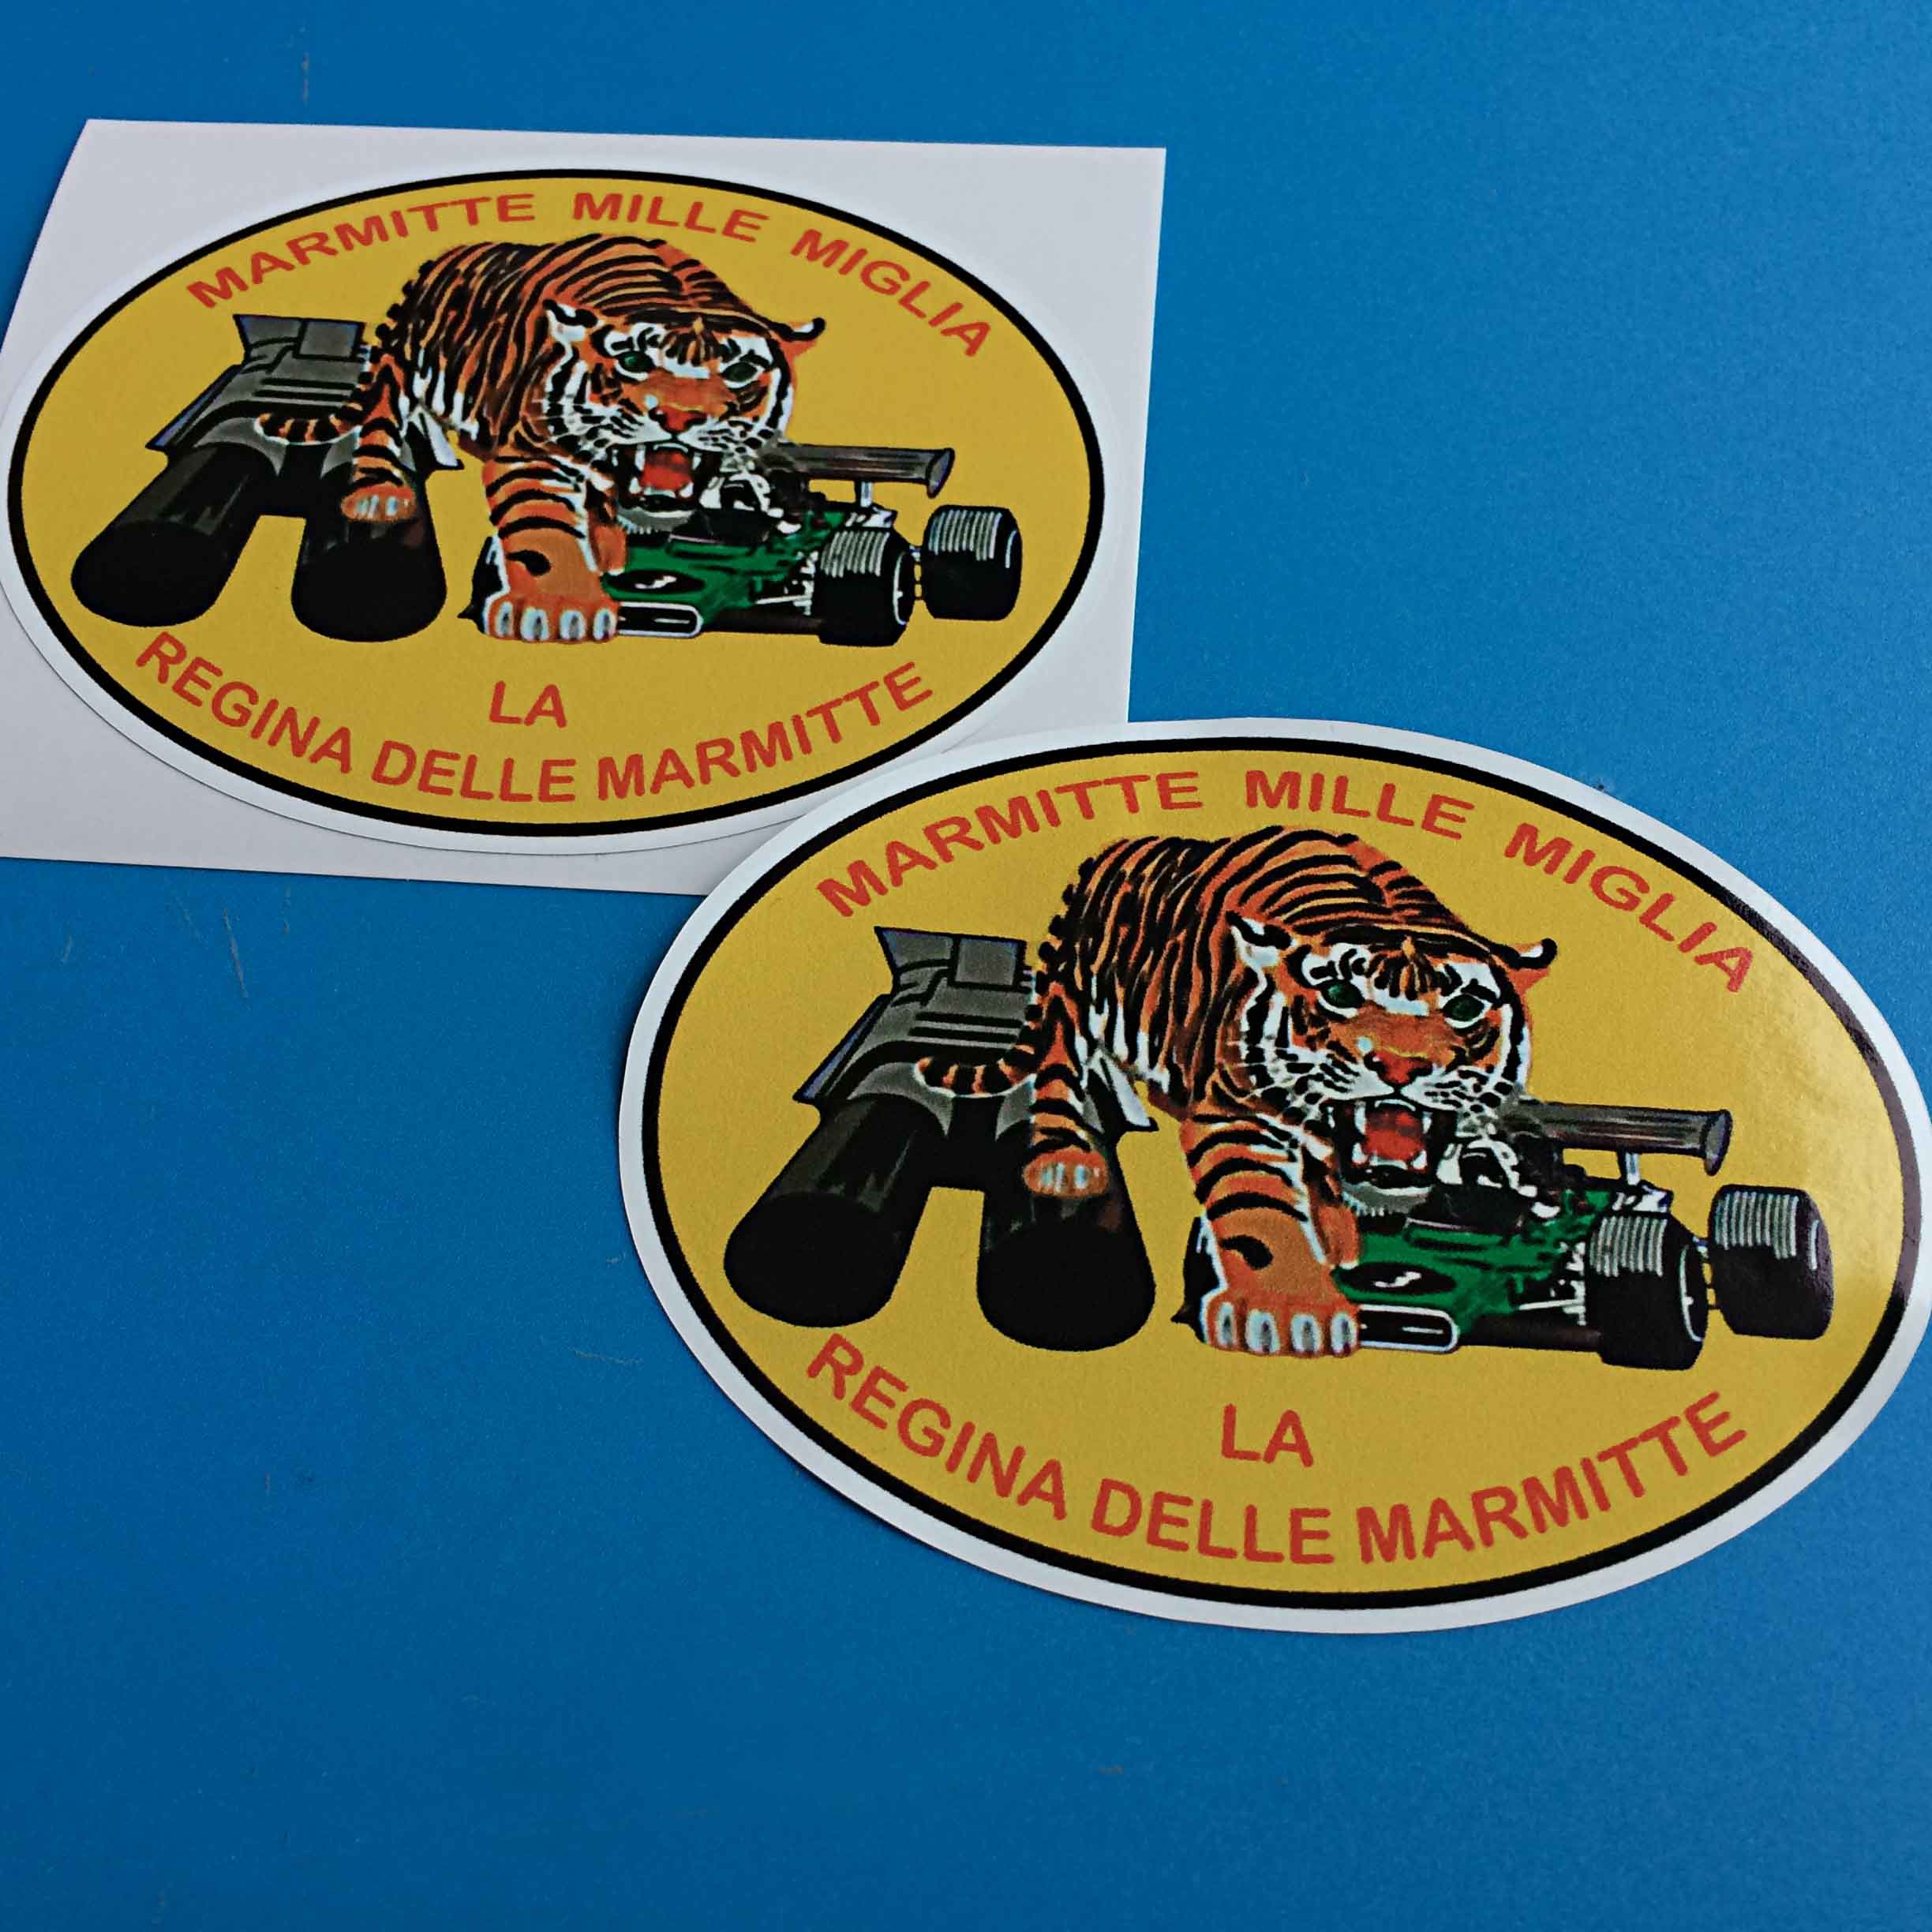 MARMITTE MILLE MIGLIA STICKER. Marmitte Mille Miglia La Regina Delle Marmitte red lettering. A tiger, green racing car and exhaust pipes are in the centre of a yellow oval background.